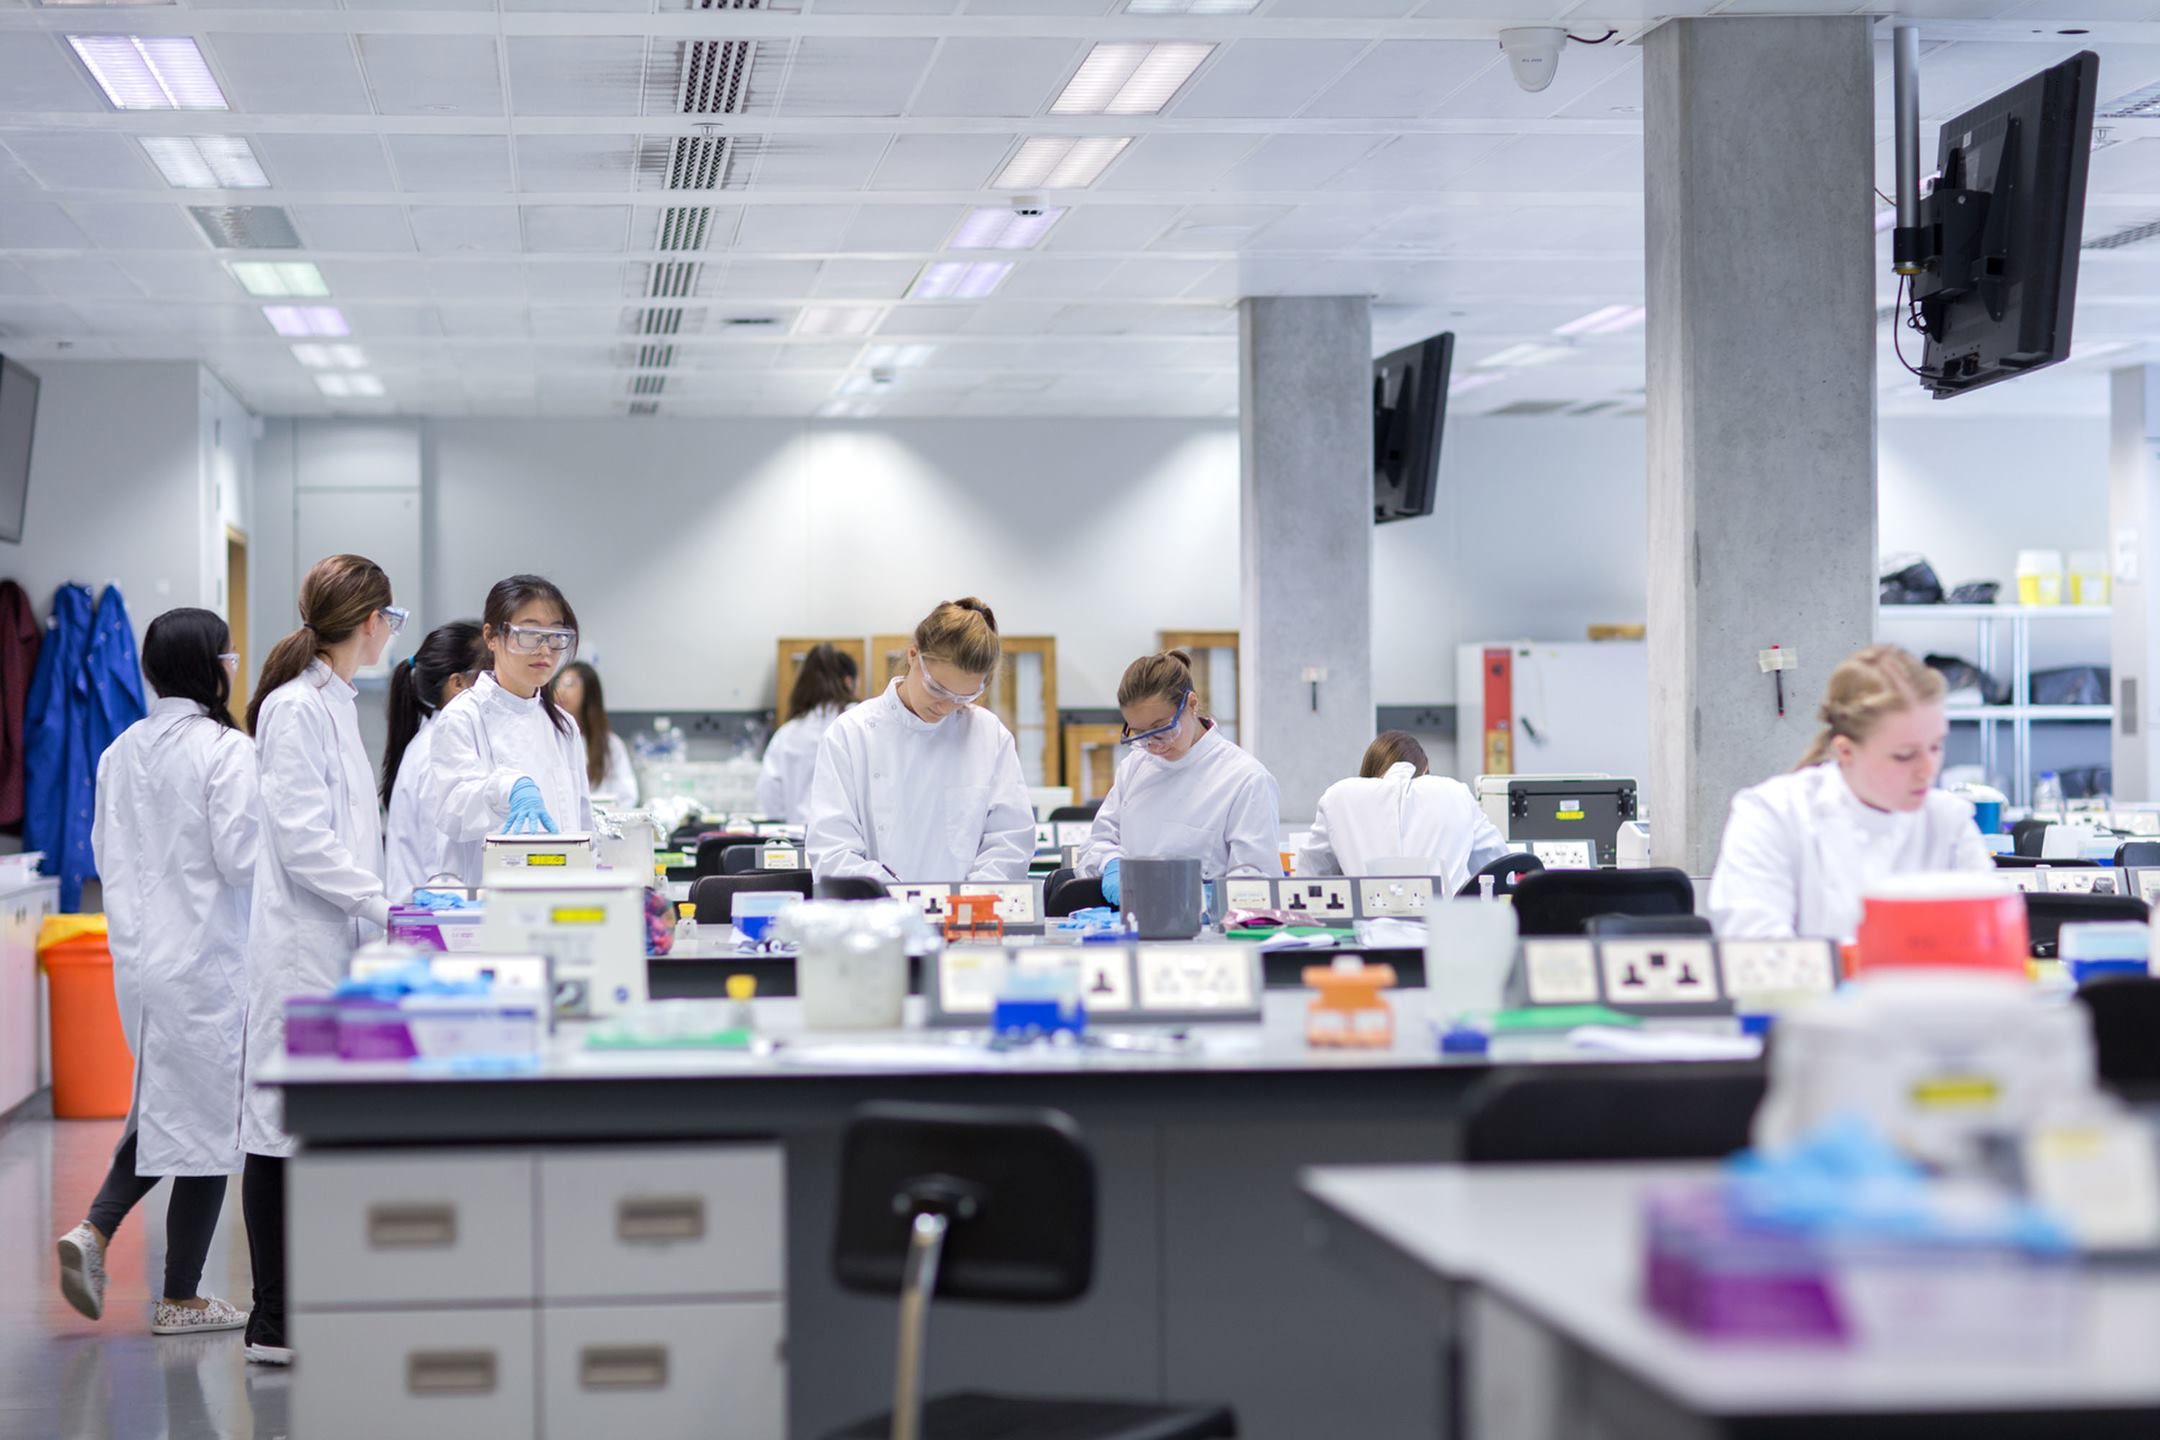 A group of students work in a lab during a class